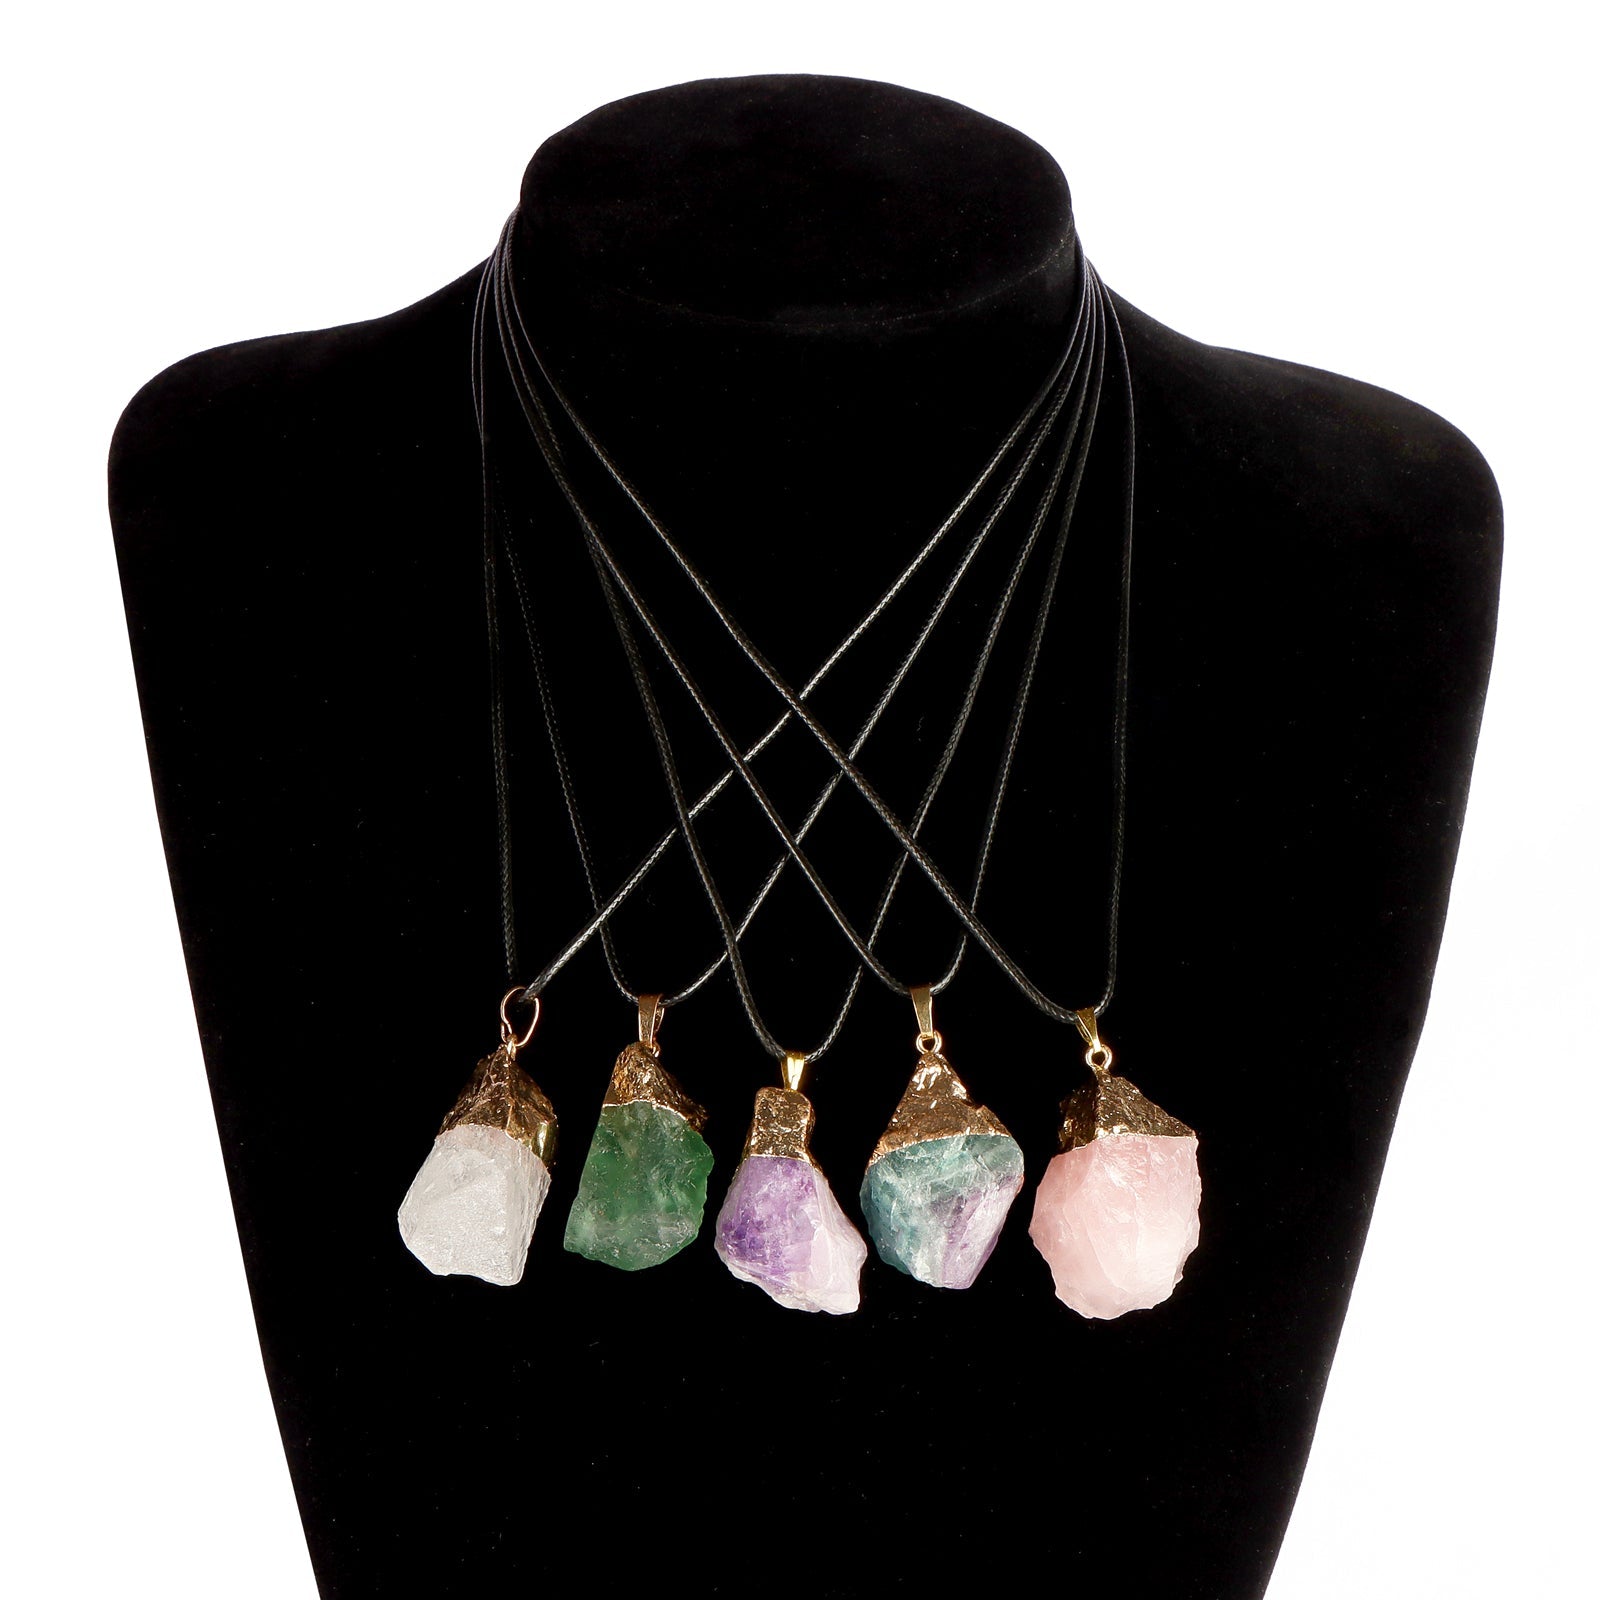 Rose Quartz Crystals Colored Crafts Gemstones Necklace Aoxily CHN, Inc. All Rights Reserved.